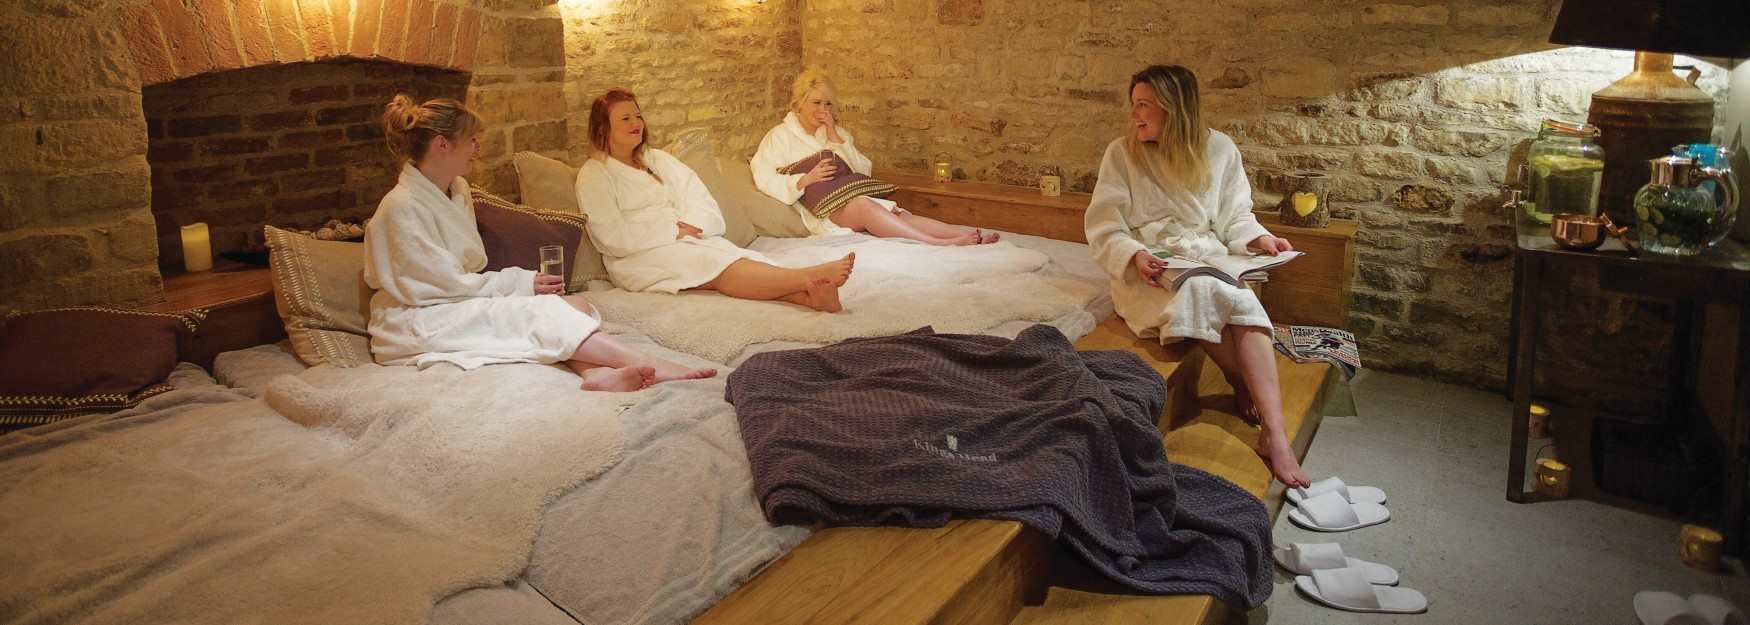 Group of ladies relaxing at The Vaulted Spa at the Kings Head Hotel, Cirencester